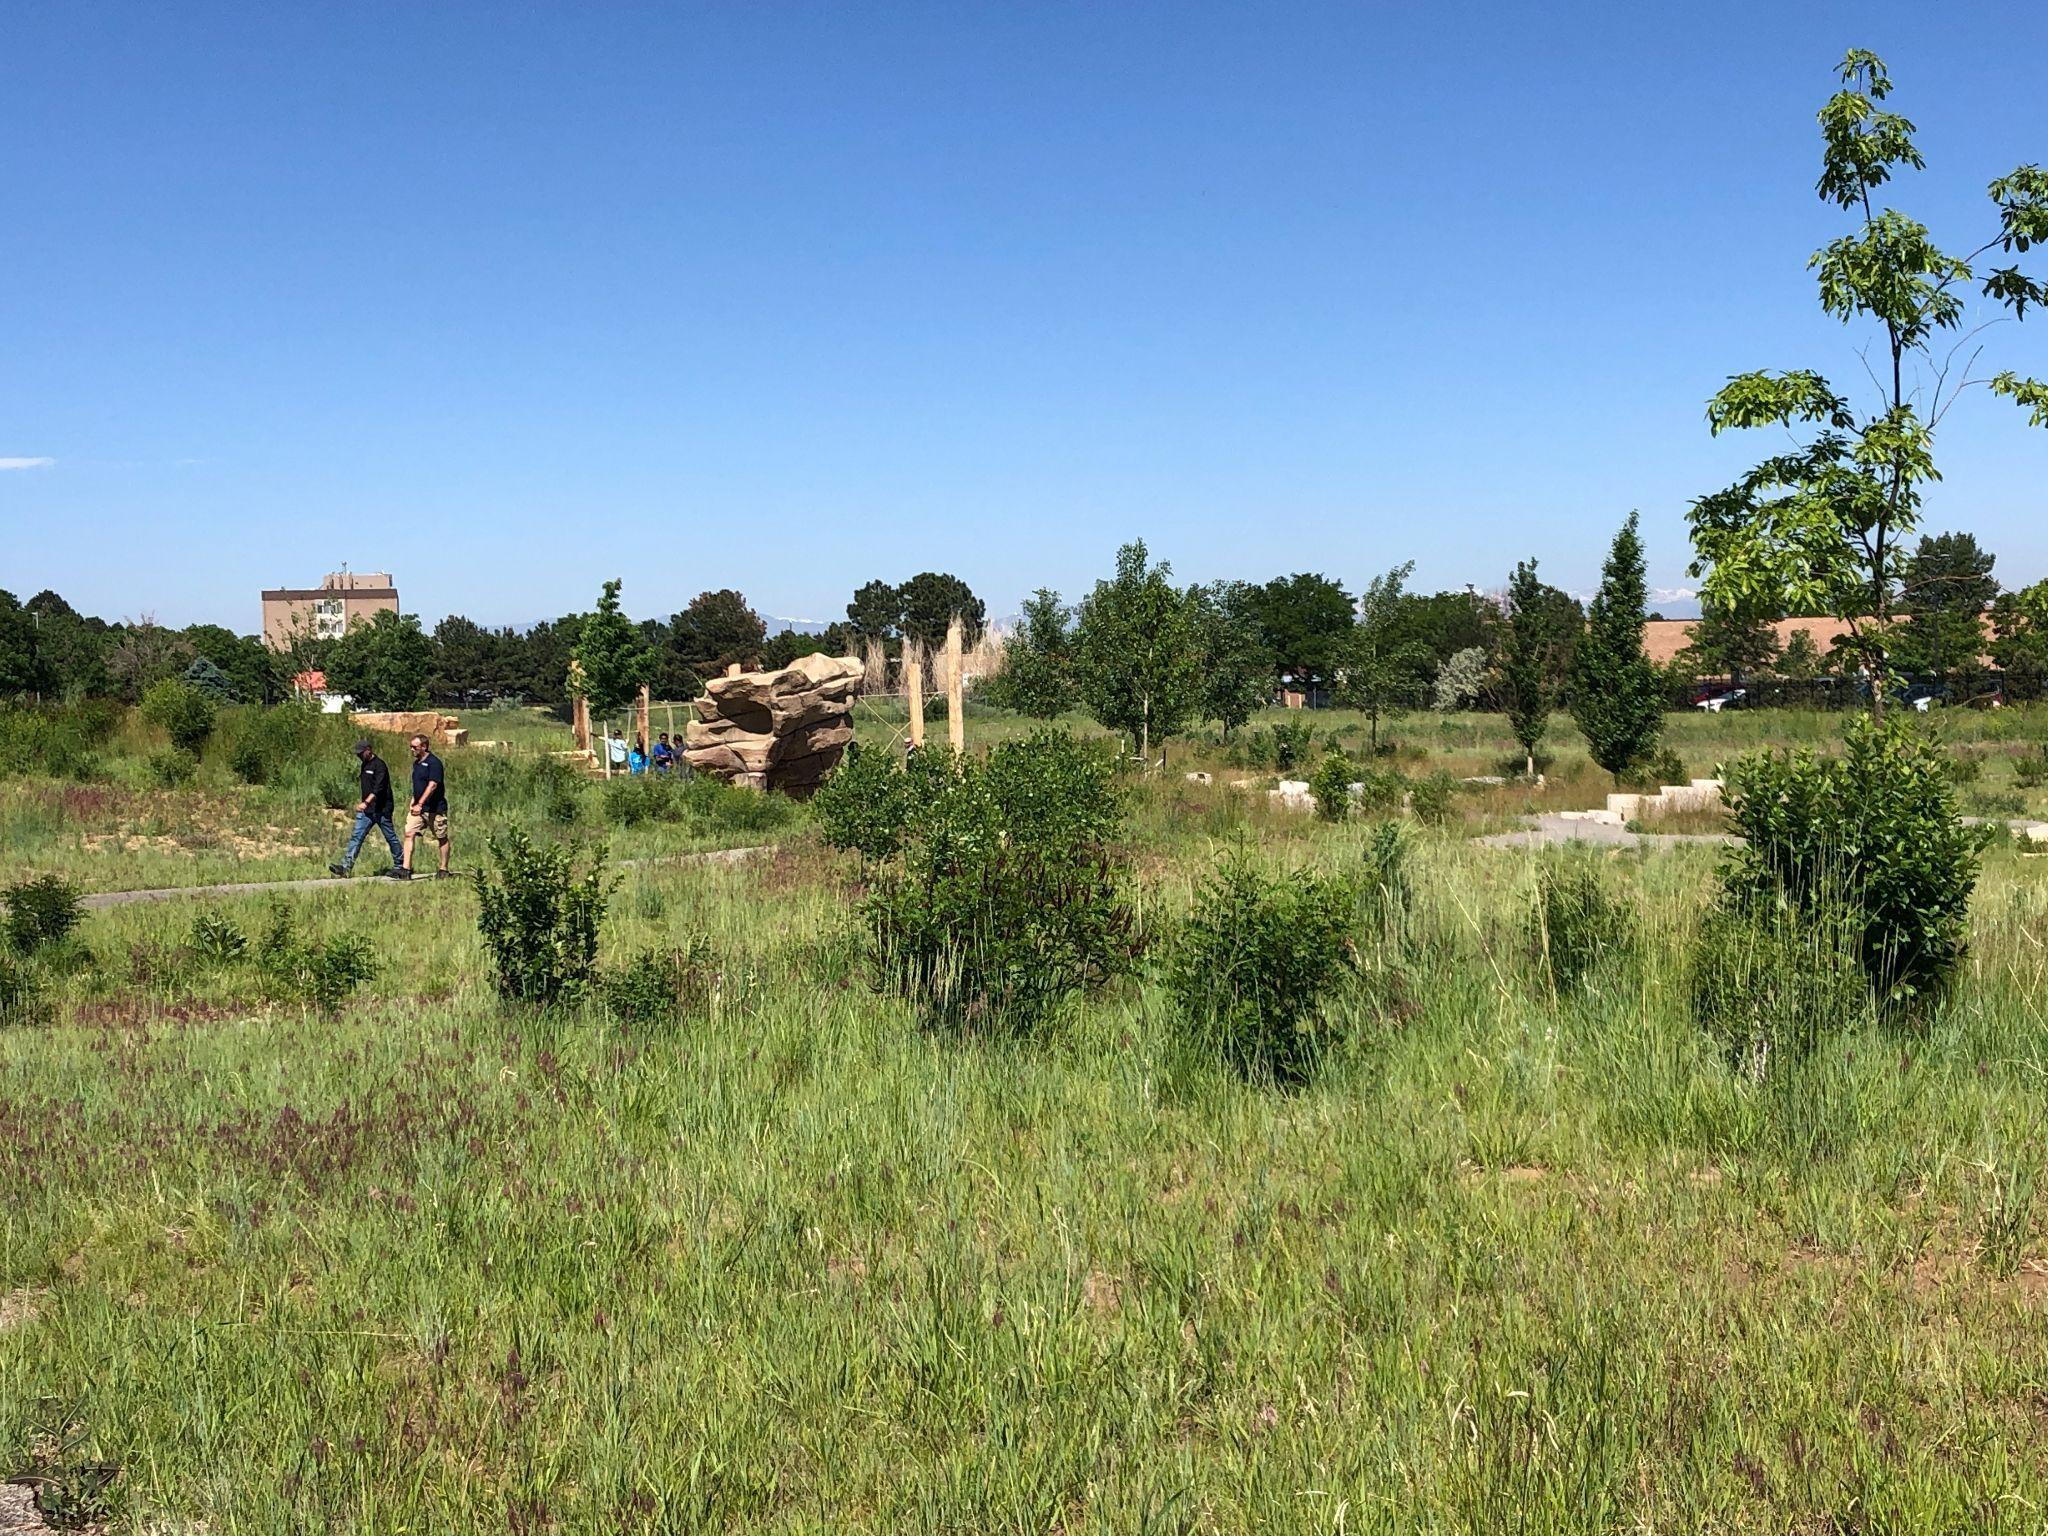 Restoration at Environmental Learning for Kids, Montbello, showing a walking path, various grasses and shrubs, as well as small rock formations